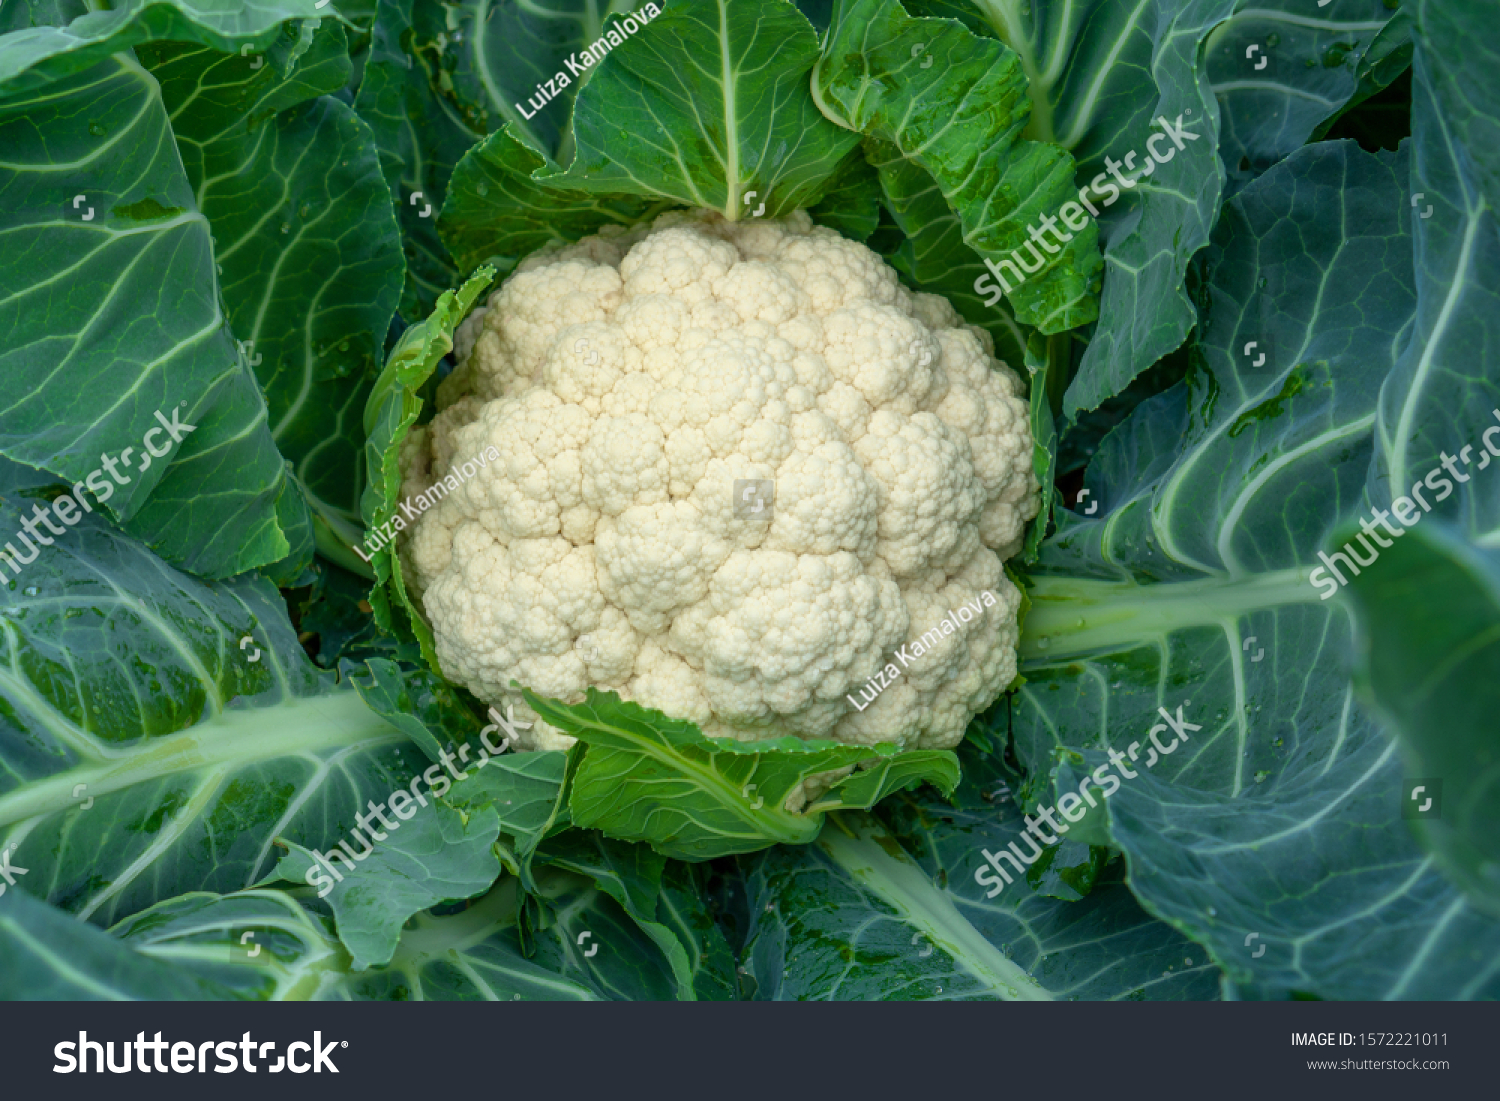 Cauliflower grows in organic soil in the garden on the vegetable area. Cauliflower head in natural conditions, close-up #1572221011